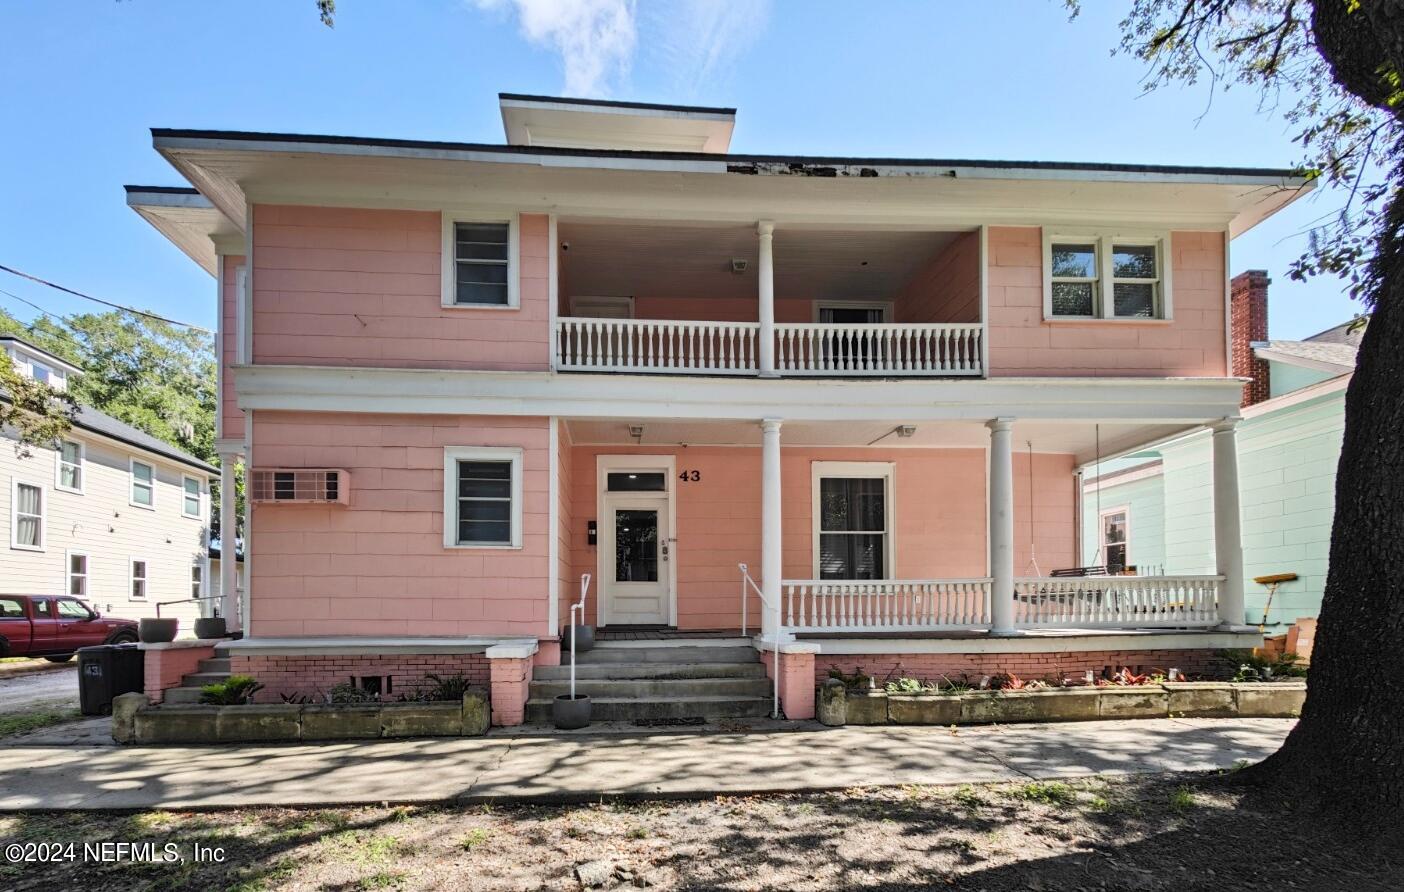 Jacksonville, FL home for sale located at 43 E 4TH Street 5, Jacksonville, FL 32206